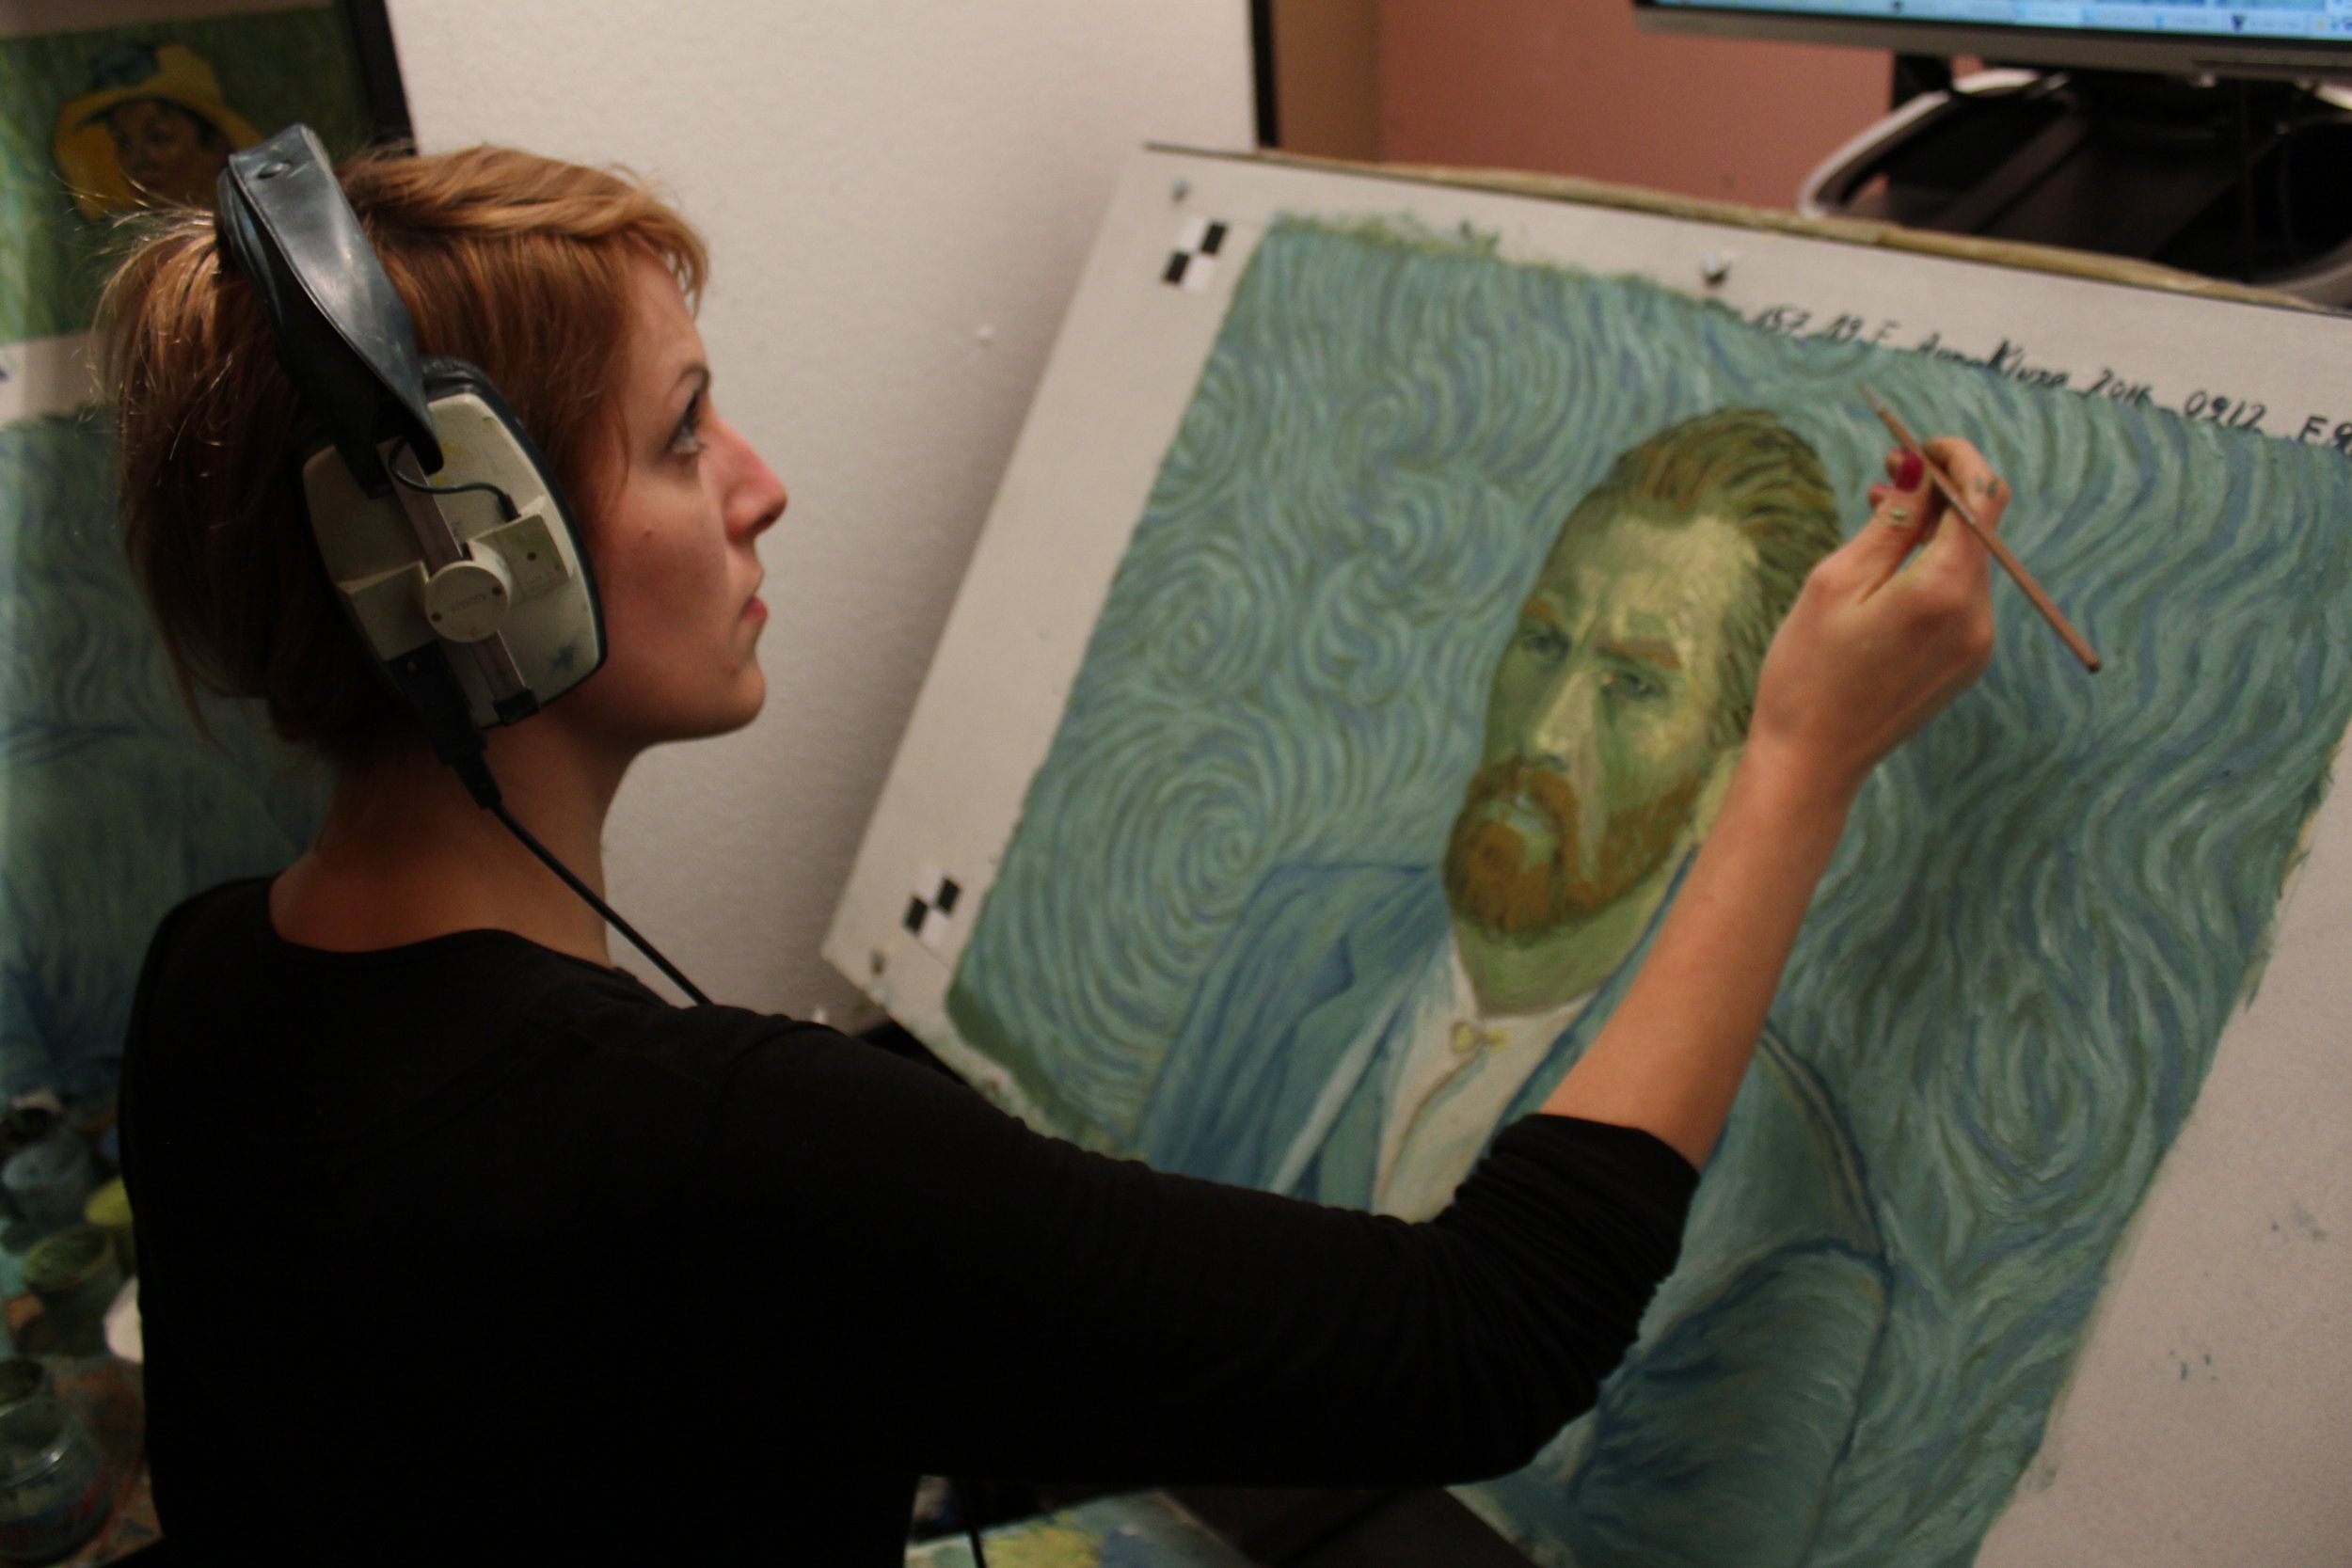  Behind the scenes images of the painting animators behind the award-winning film,  Loving Vincent  - courtesy of BreakThru Films 